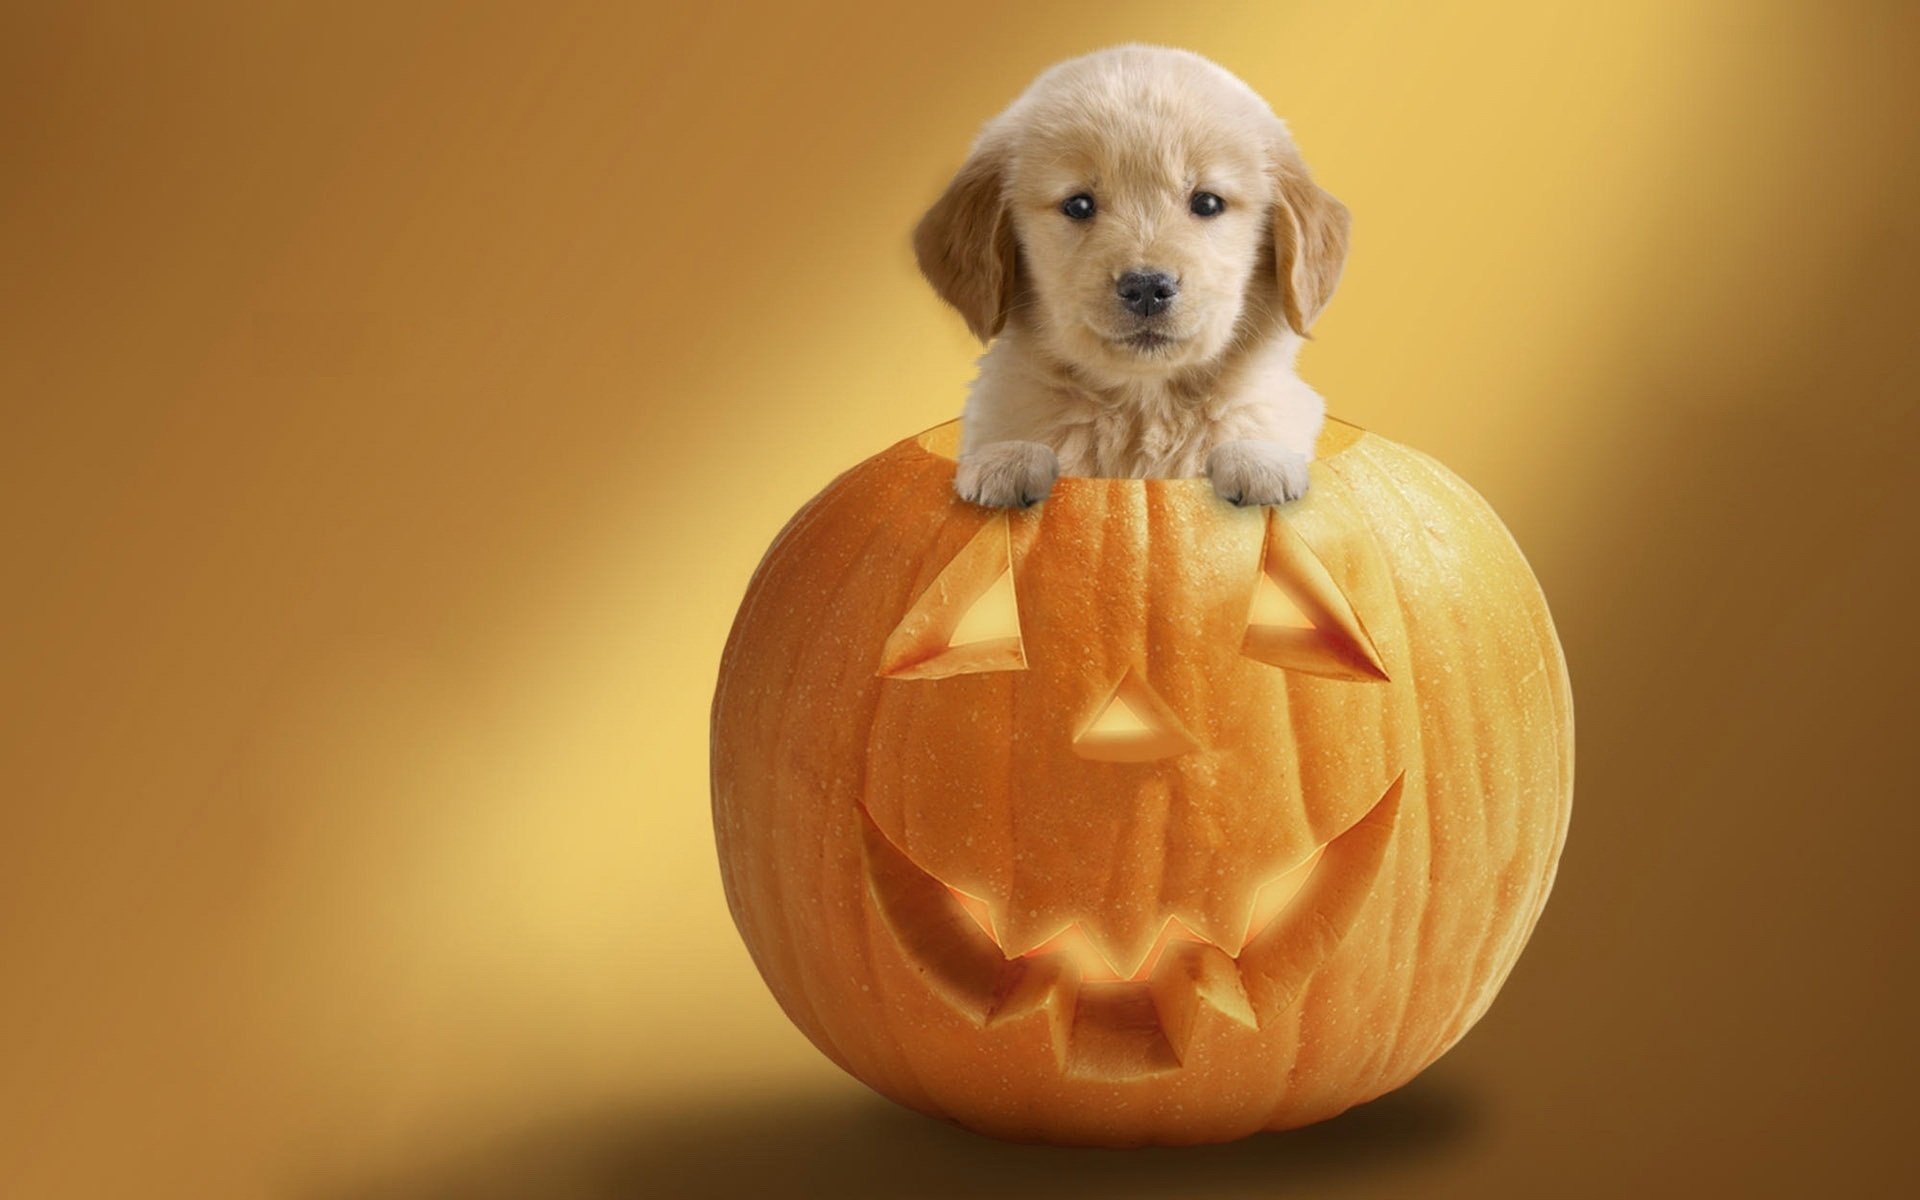 Dog in pumpkin wallpapers and images   wallpapers pictures photos 1920x1200